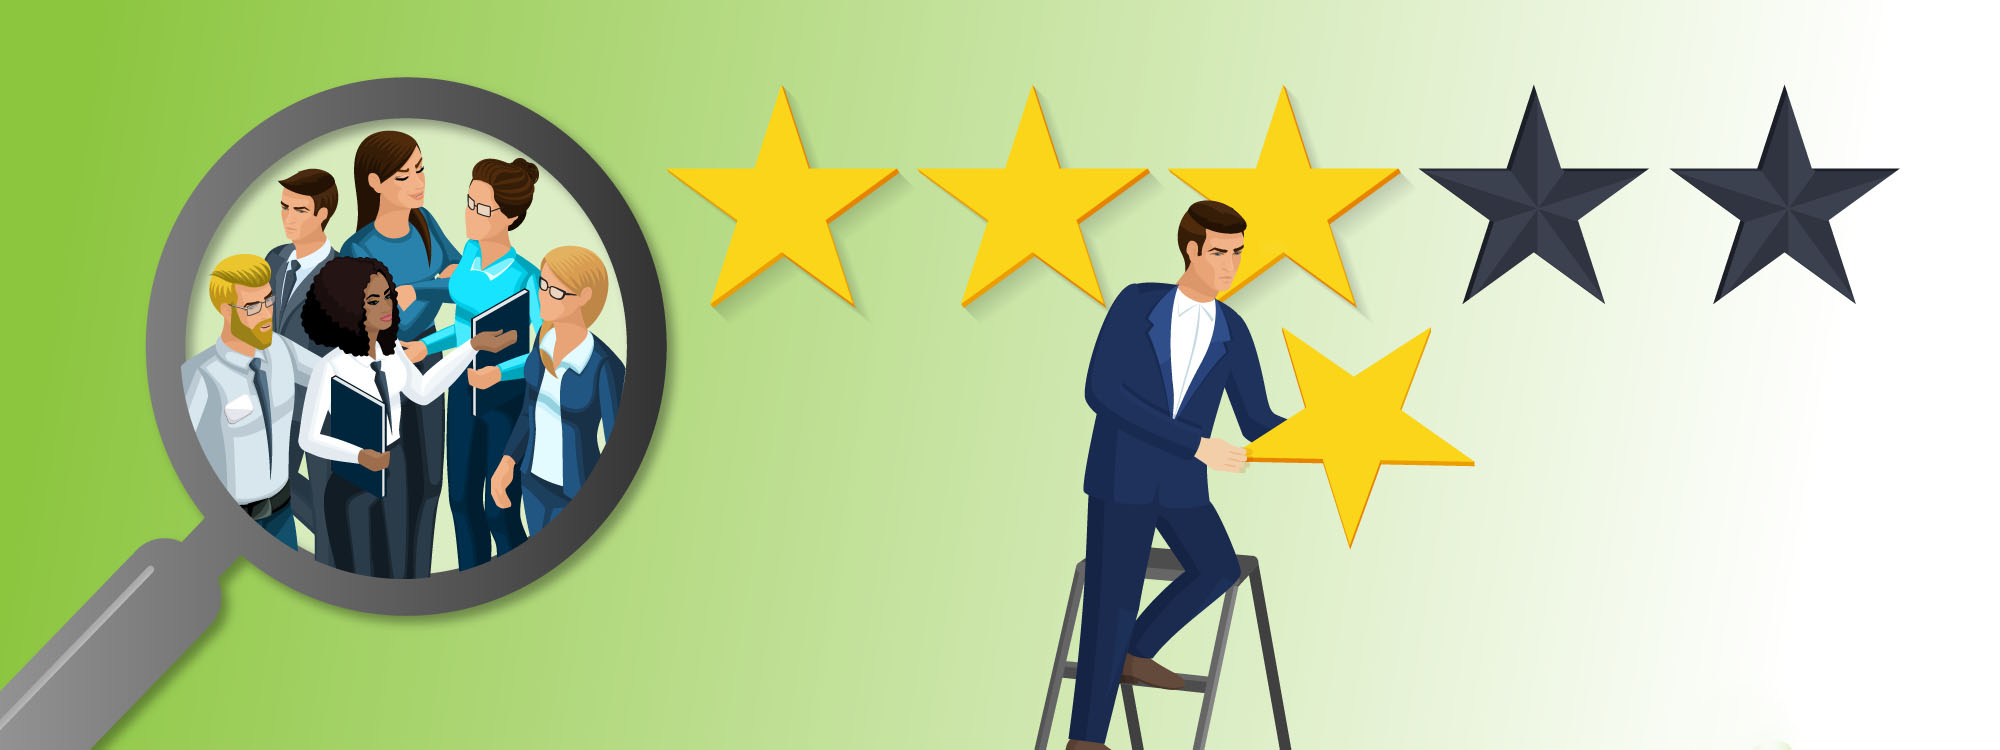 Rating the Raters: When Managers Drop the Ball with Employee Evaluations